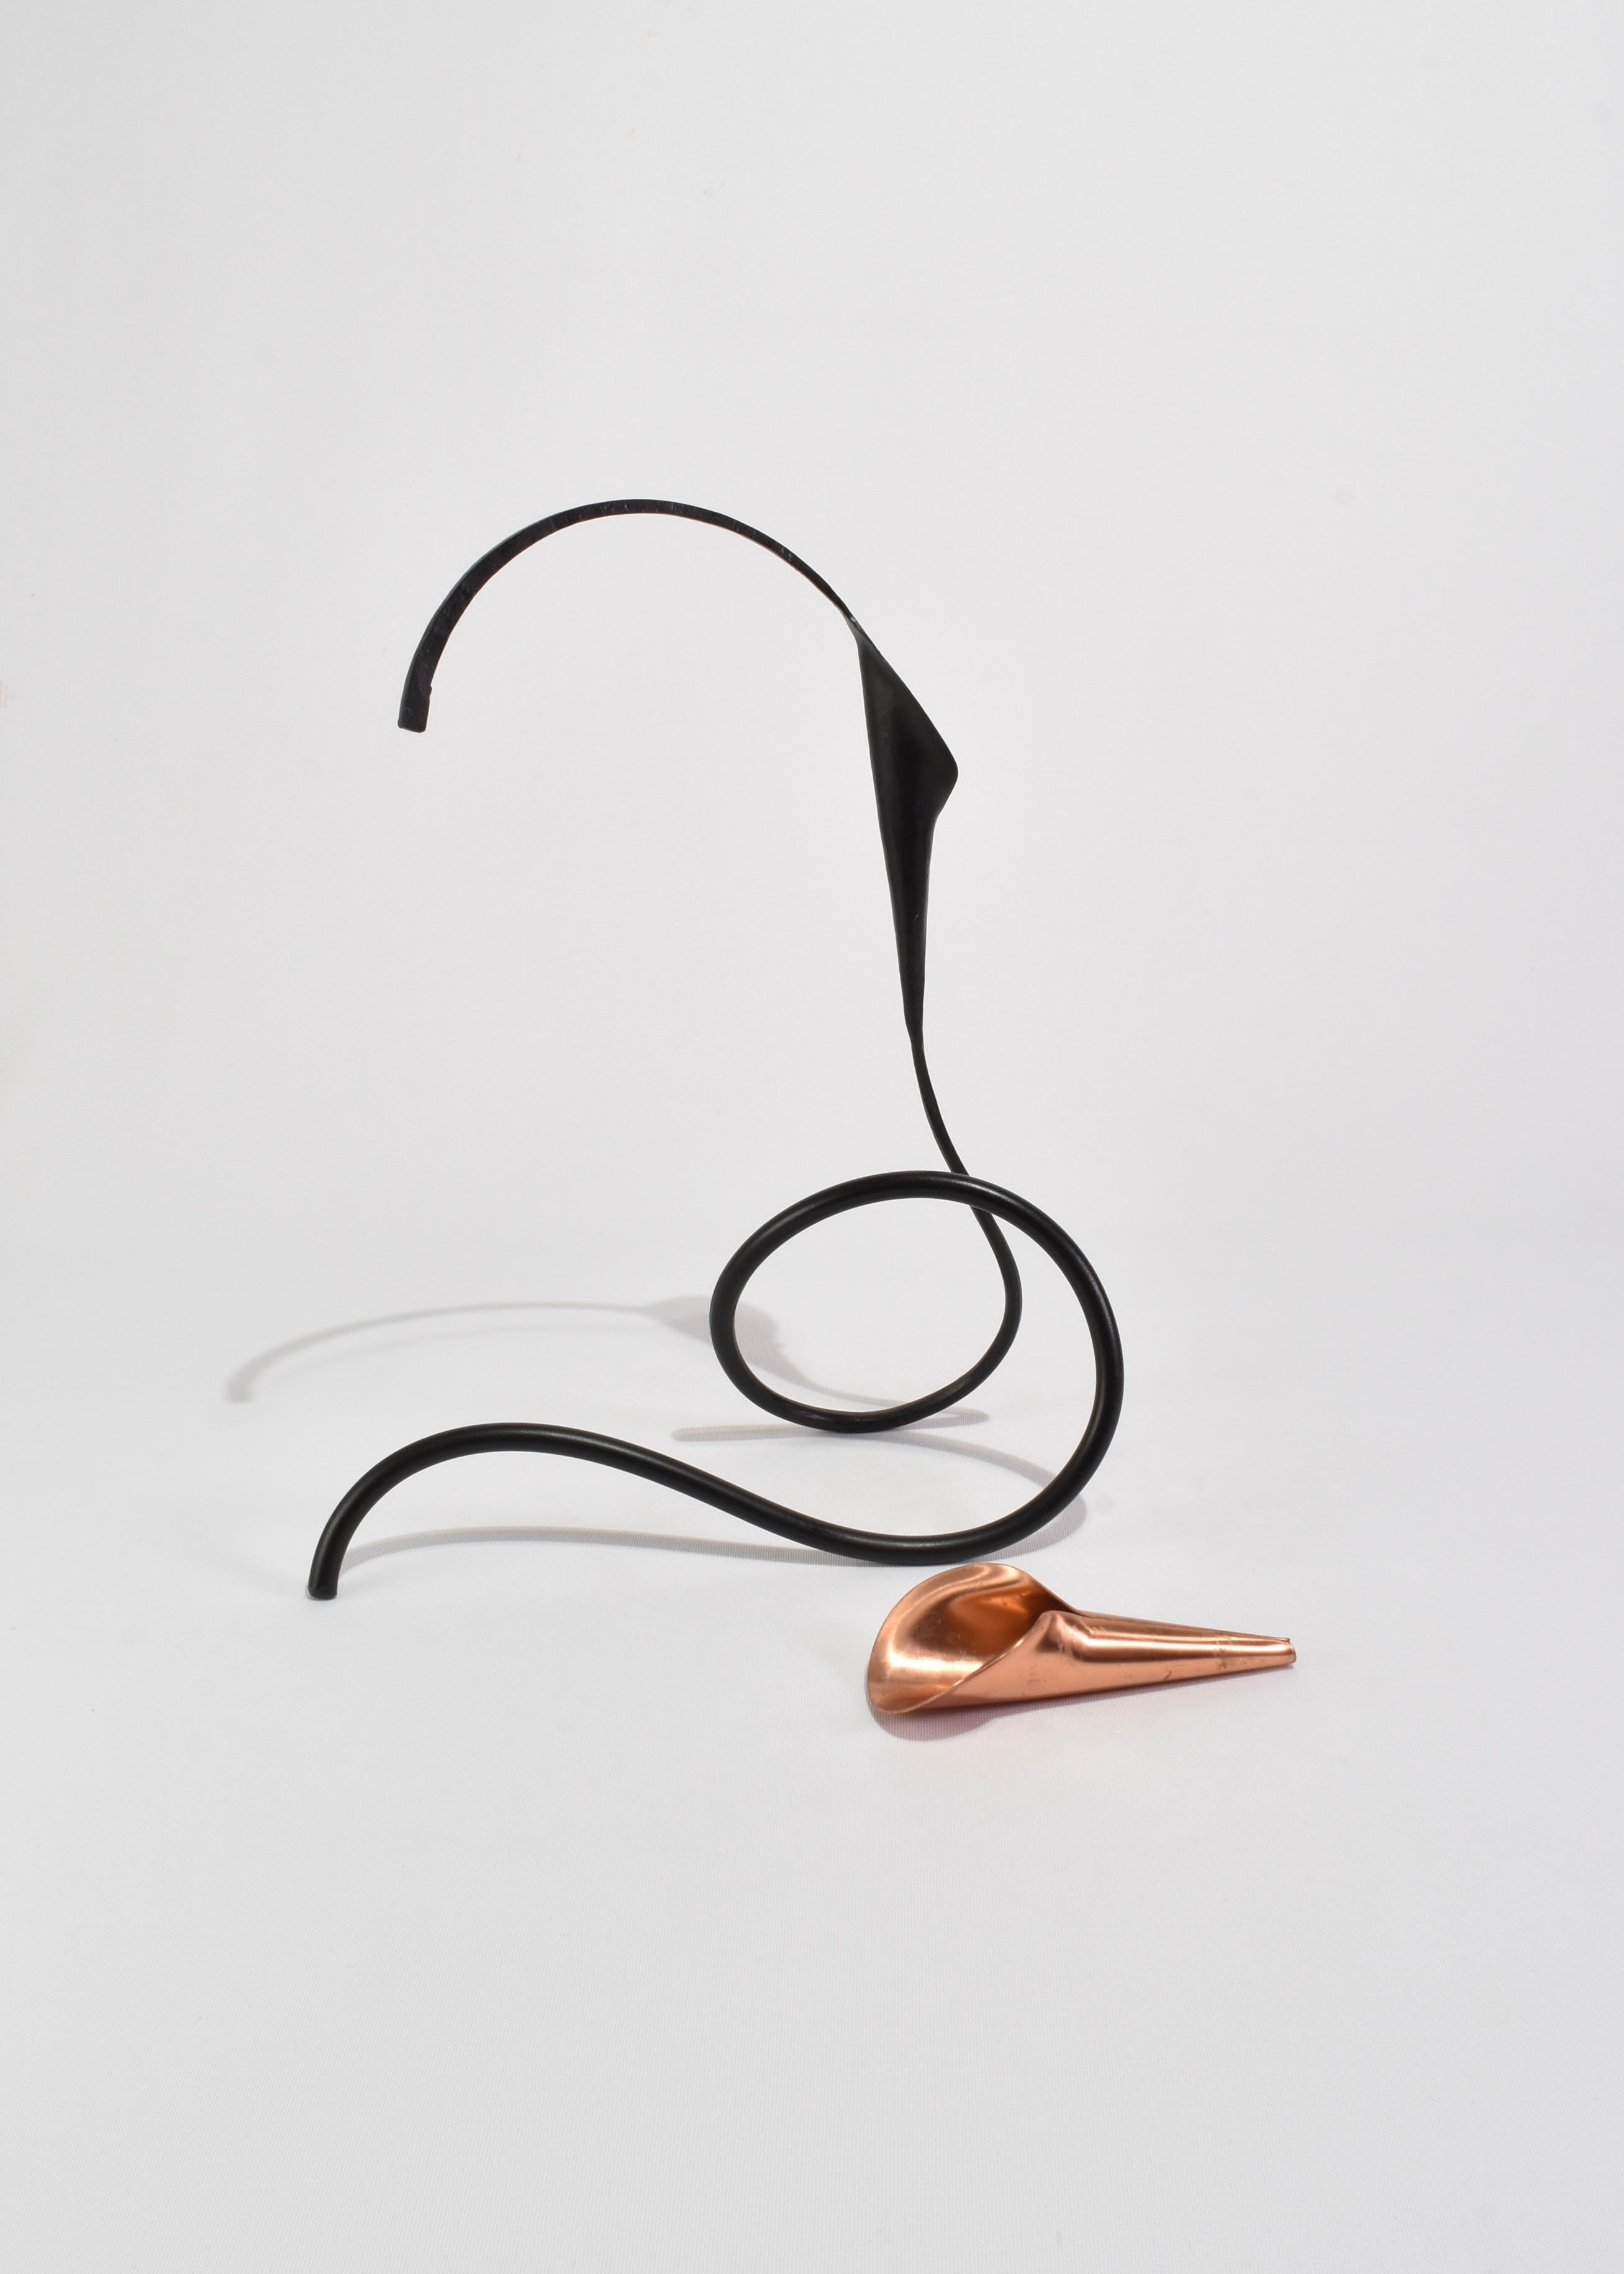 20th Century Calla Lily Candleholder For Sale